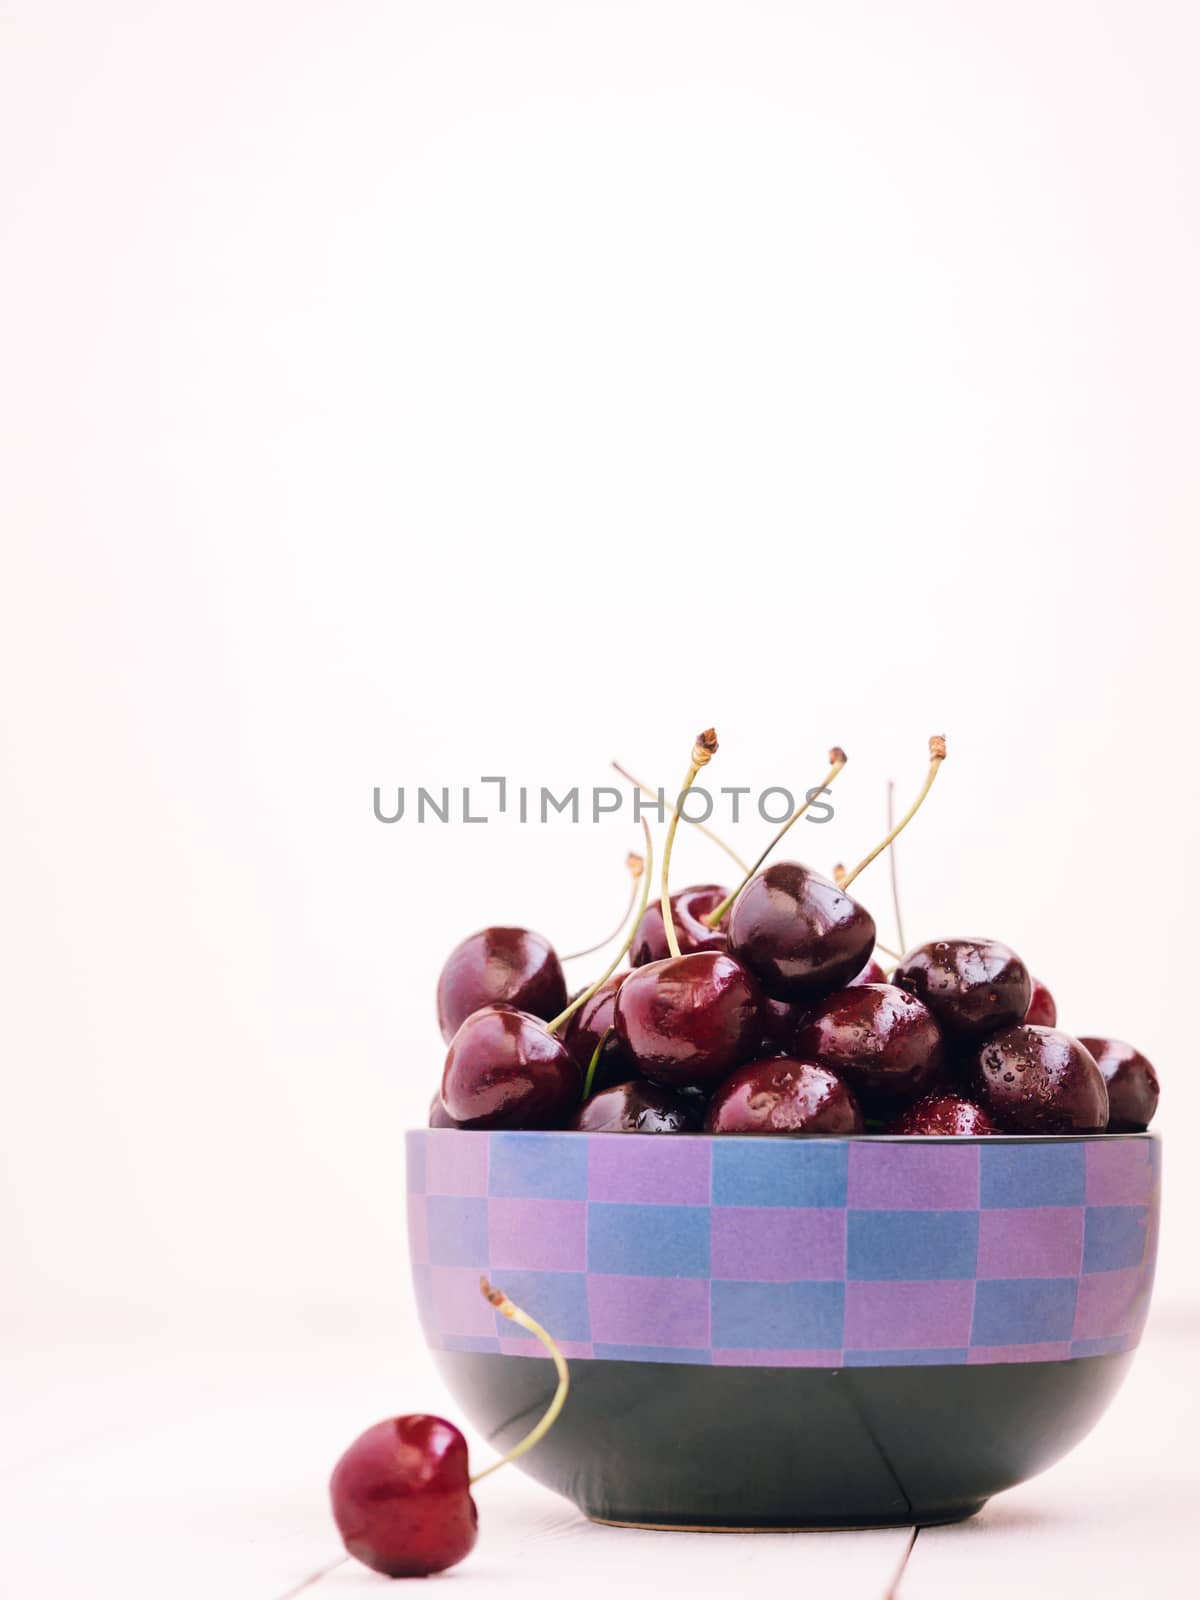 Heap of cherries in dish on white wooden table with copy space. Vertical orientation